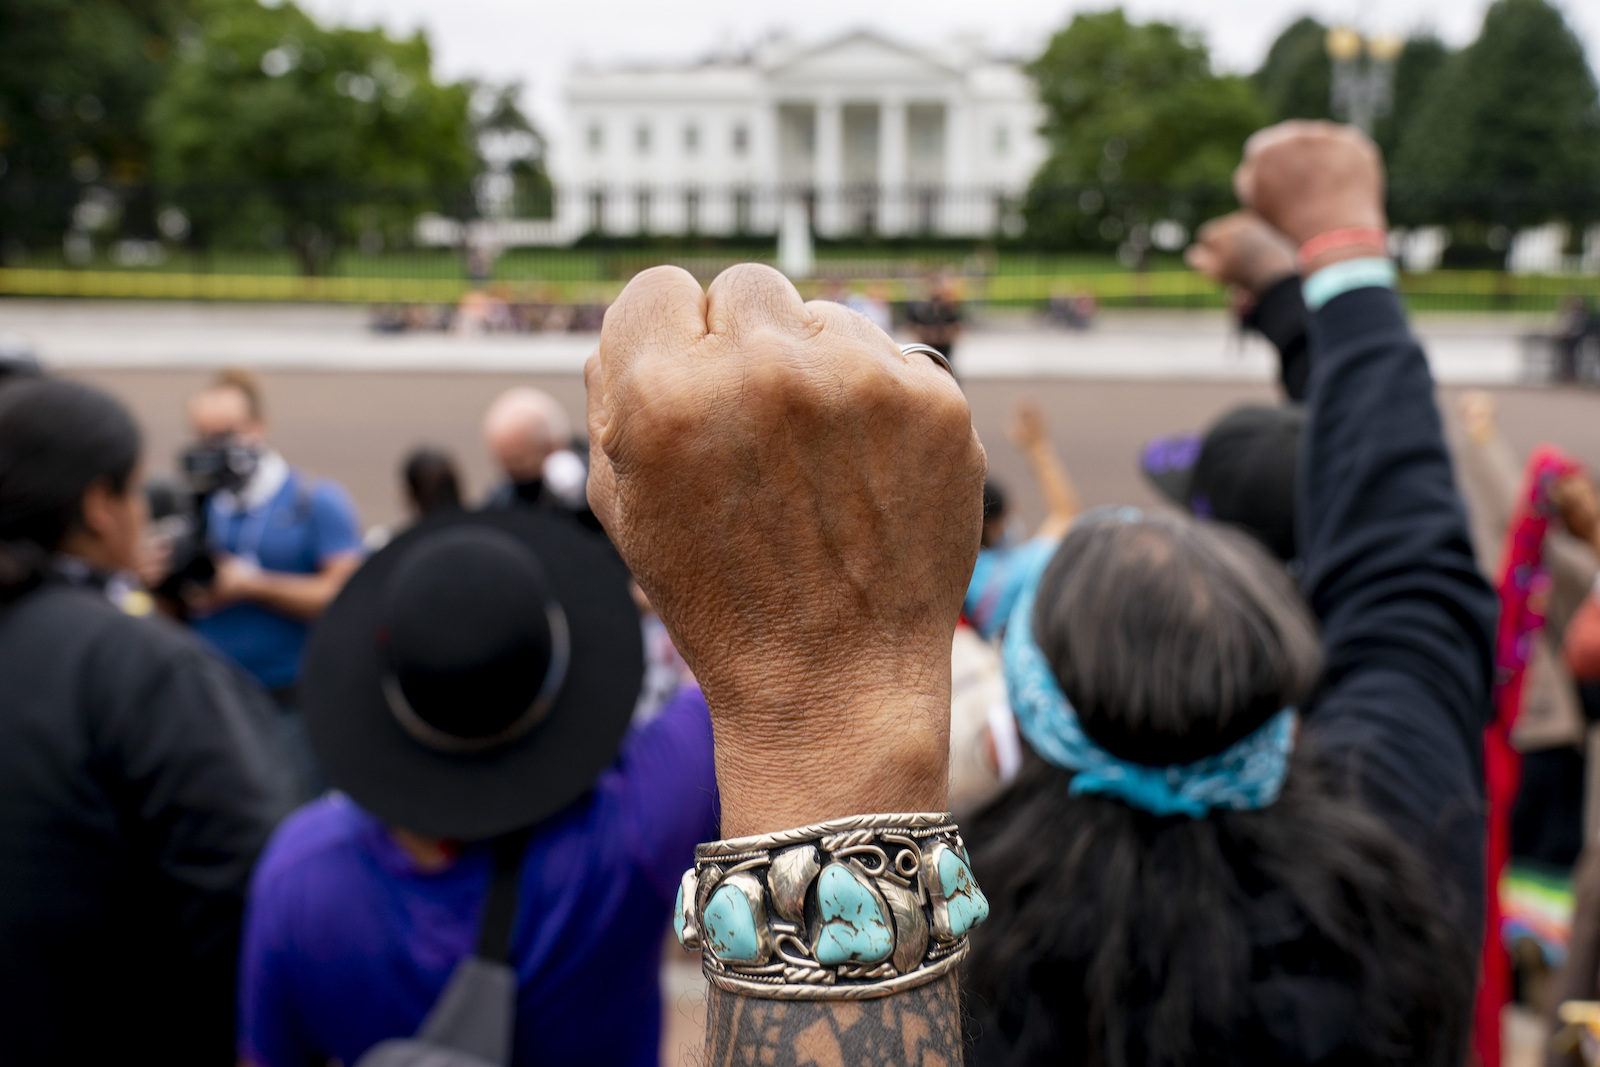 The US still won’t fully embrace the rights of Indigenous peoples, here or abroad